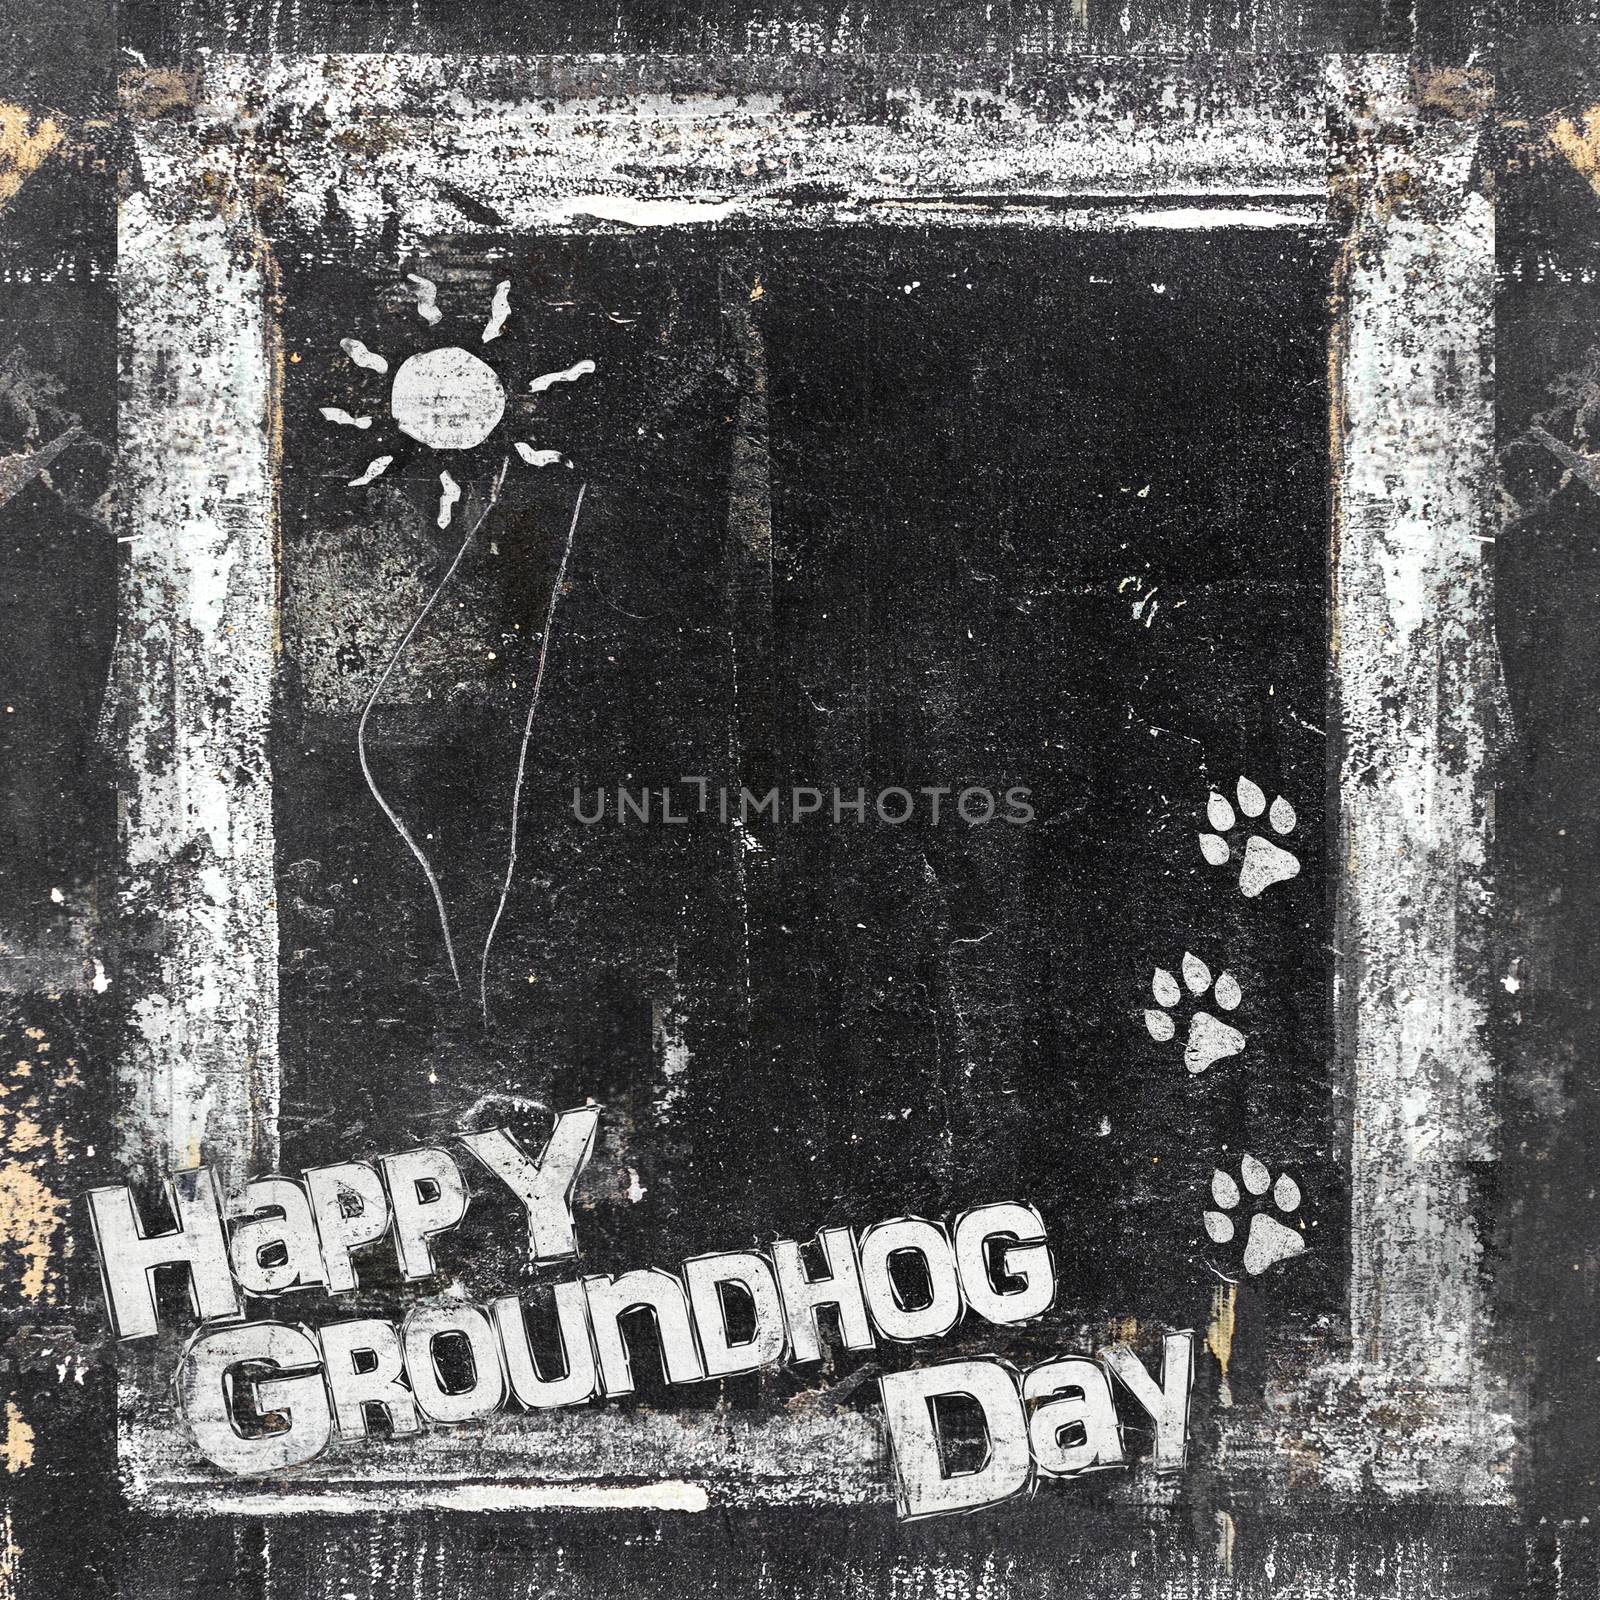 Groundhog Day small blackboard in grunge style, scratched and ruined. Dirty artistic design element, box, frame for text. Doodle frame.